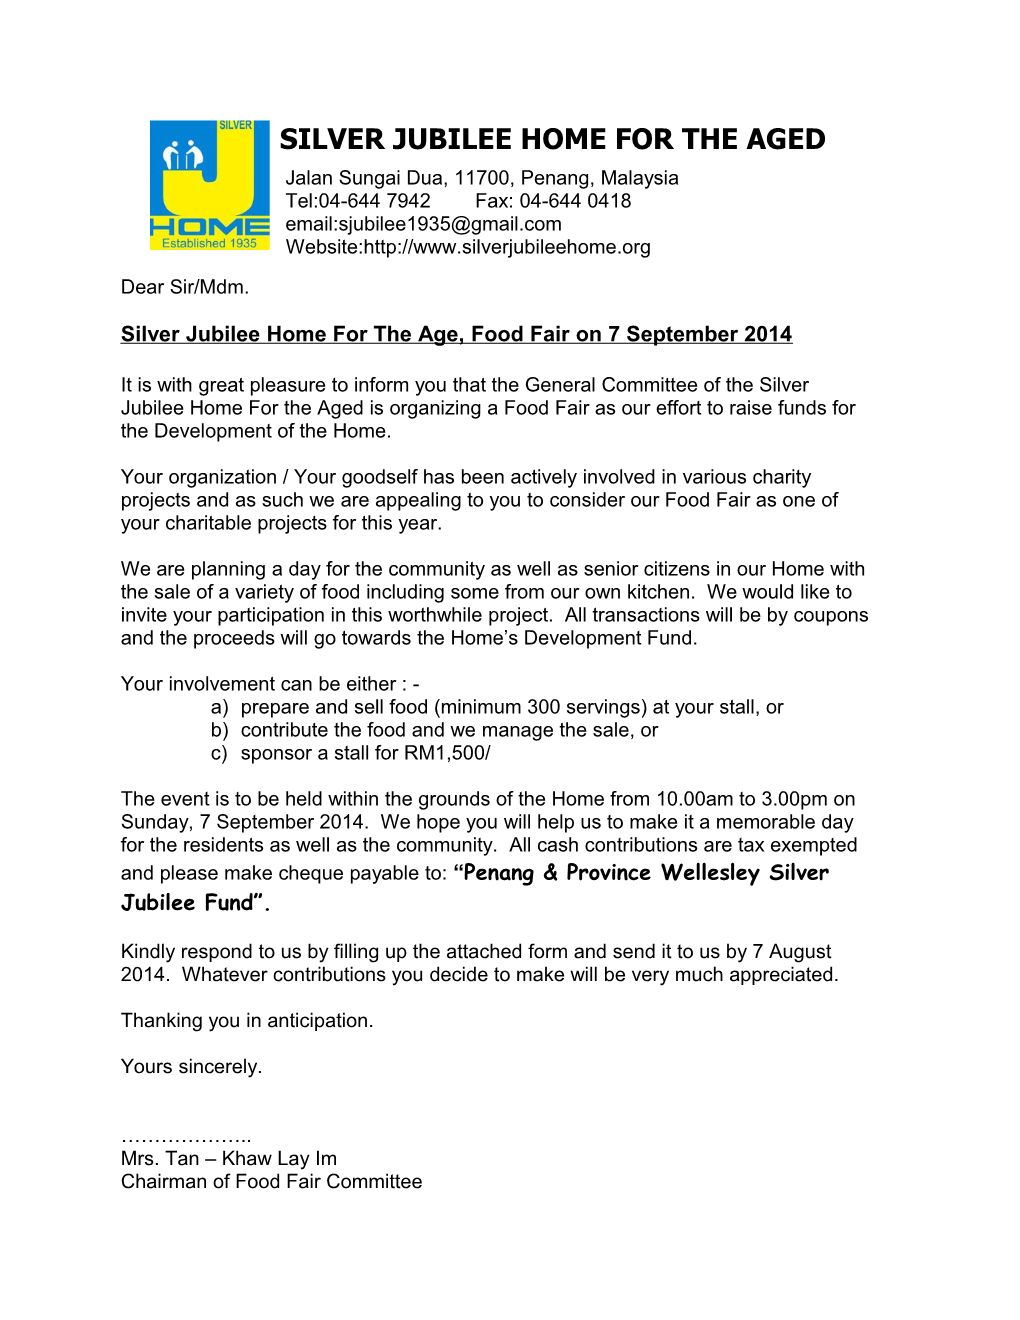 Silver Jubilee Home for the Age, Food Fair on 7 September 2014